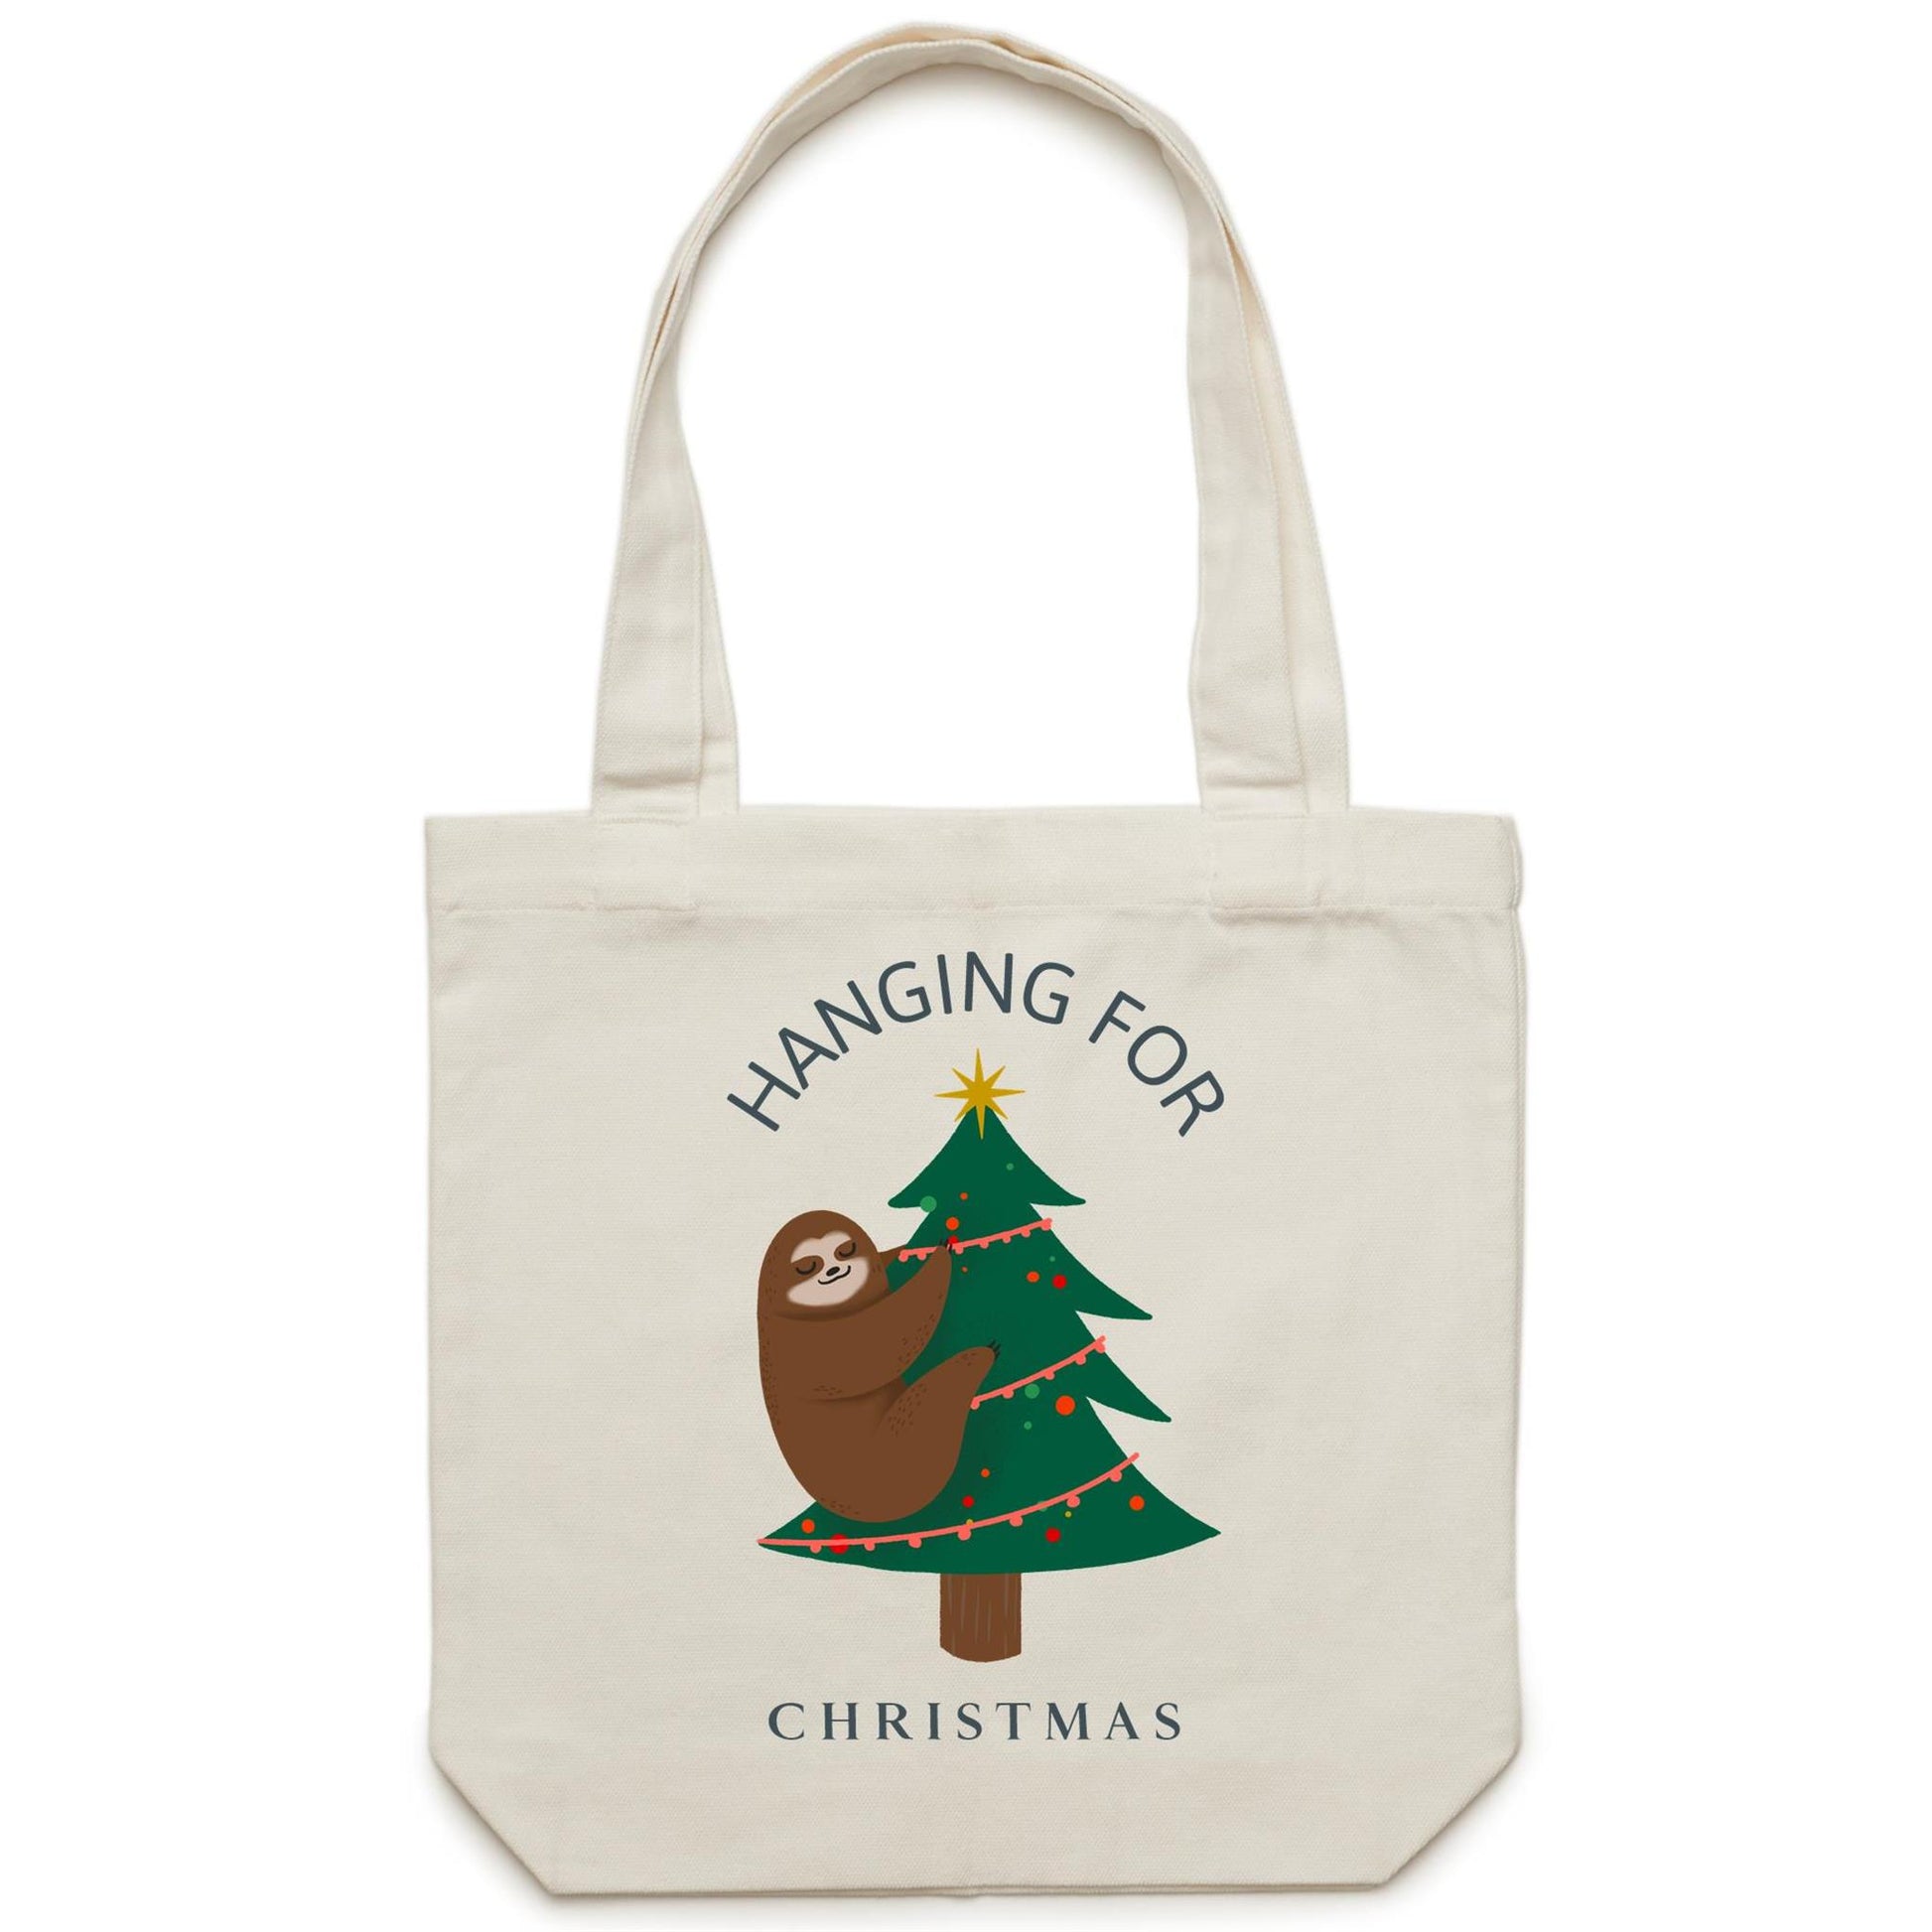 Hanging For Christmas - Canvas Tote Bag Cream One Size Christmas Tote Bag Merry Christmas